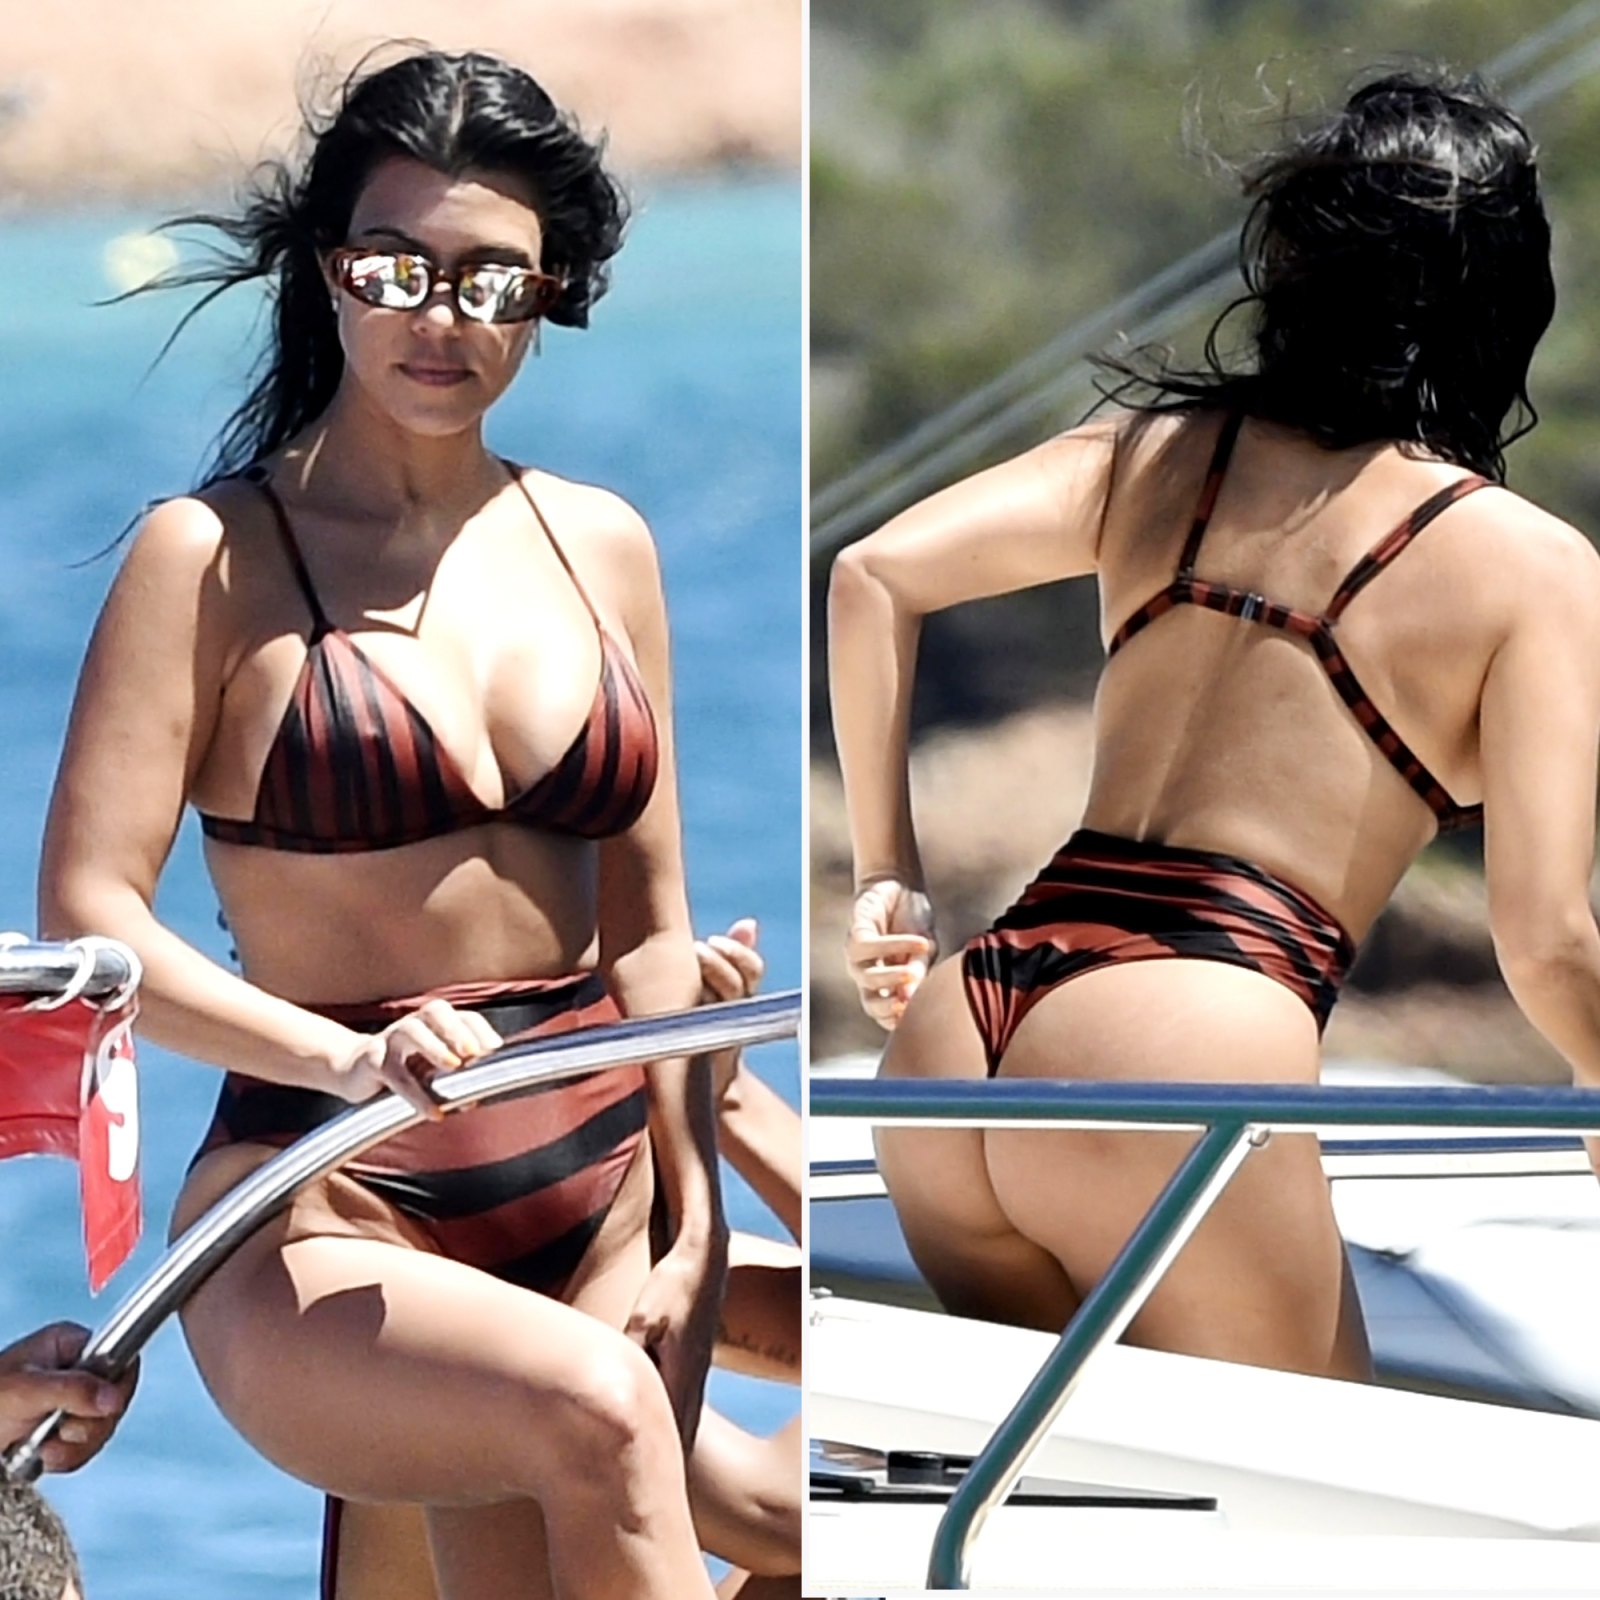 Kourtney Kardashian Has Never Looked Better Than on This Yacht